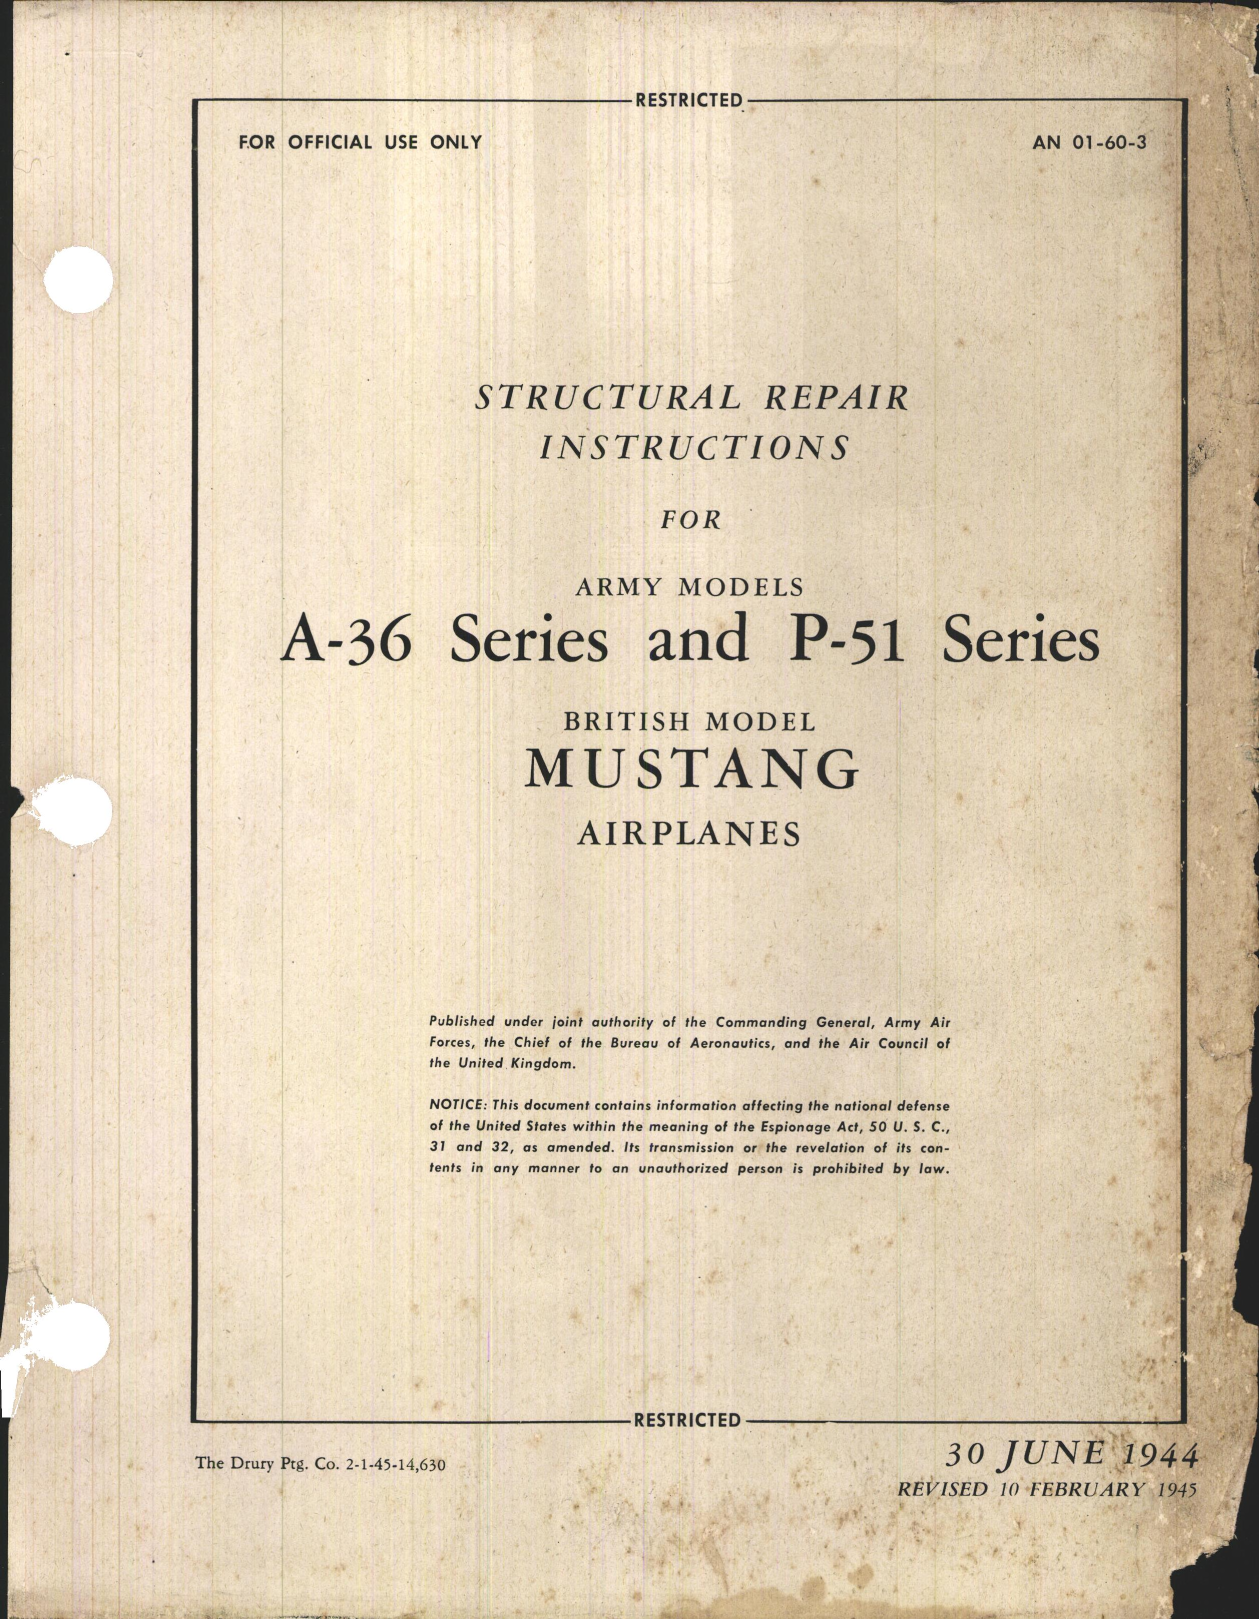 Sample page 1 from AirCorps Library document: Structural Repair Instructions for A-36 Series and P-51 Series